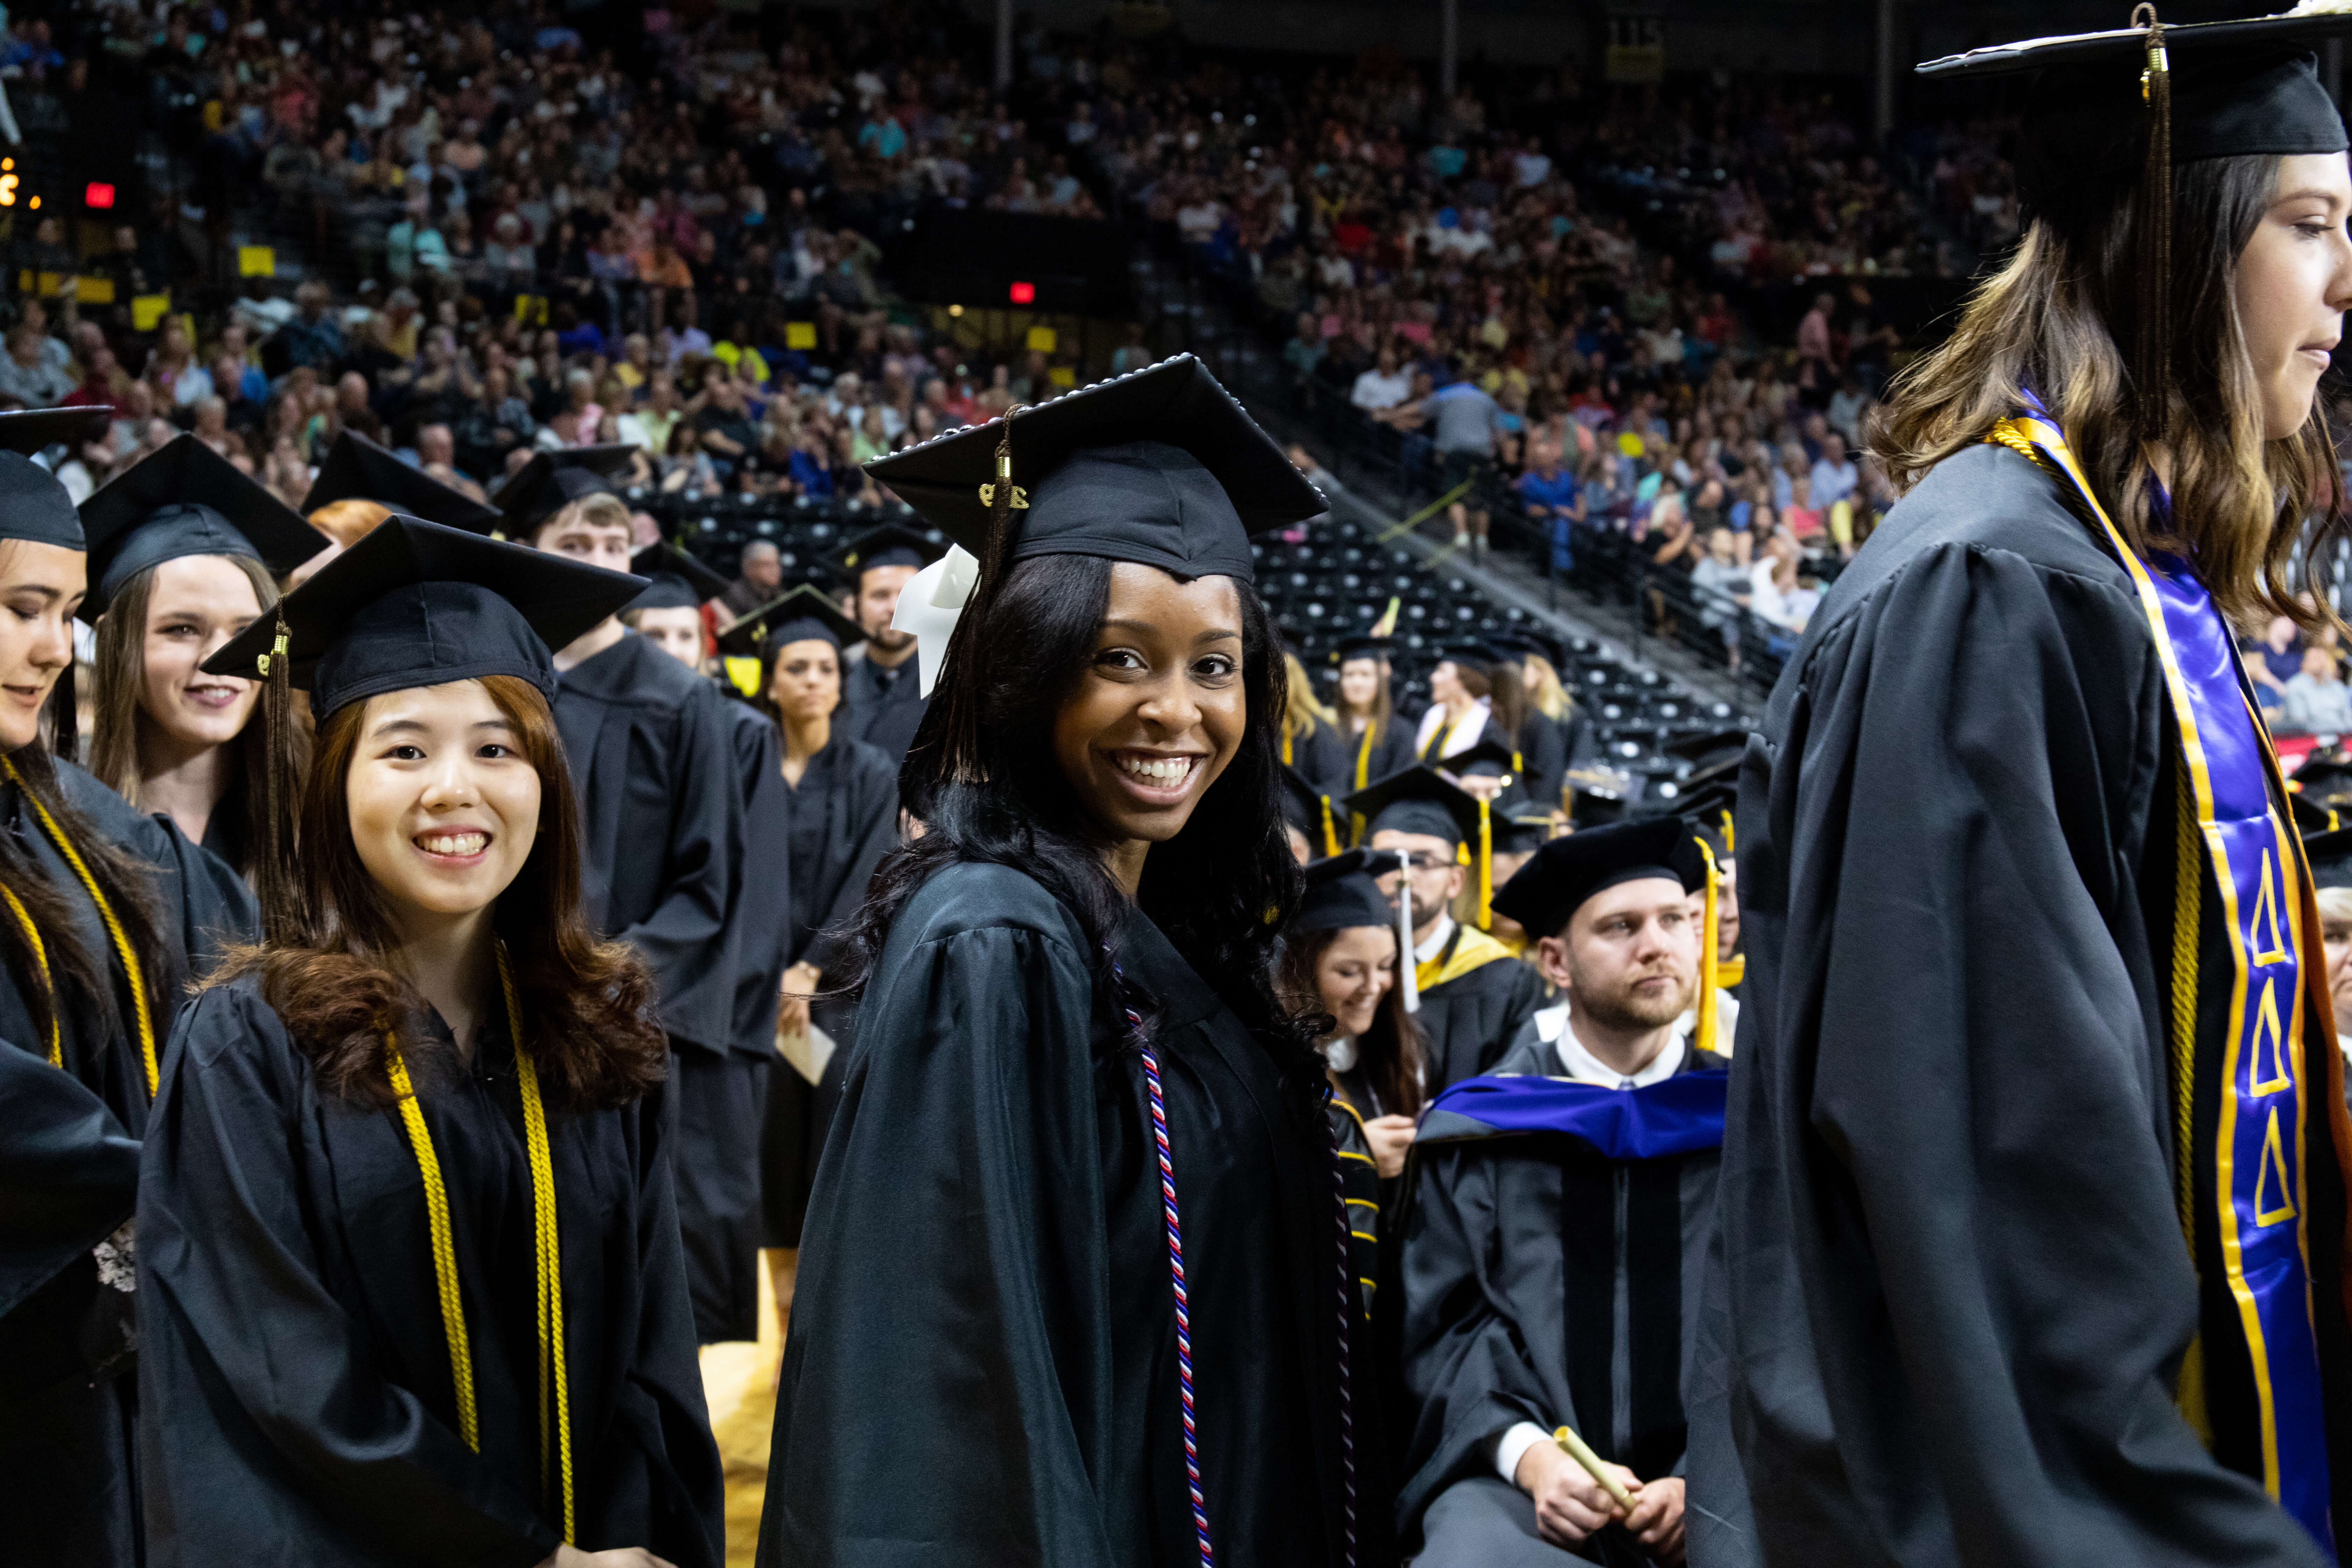 Supply Chain Management at Wichita State University: Quality, affordability, innovation